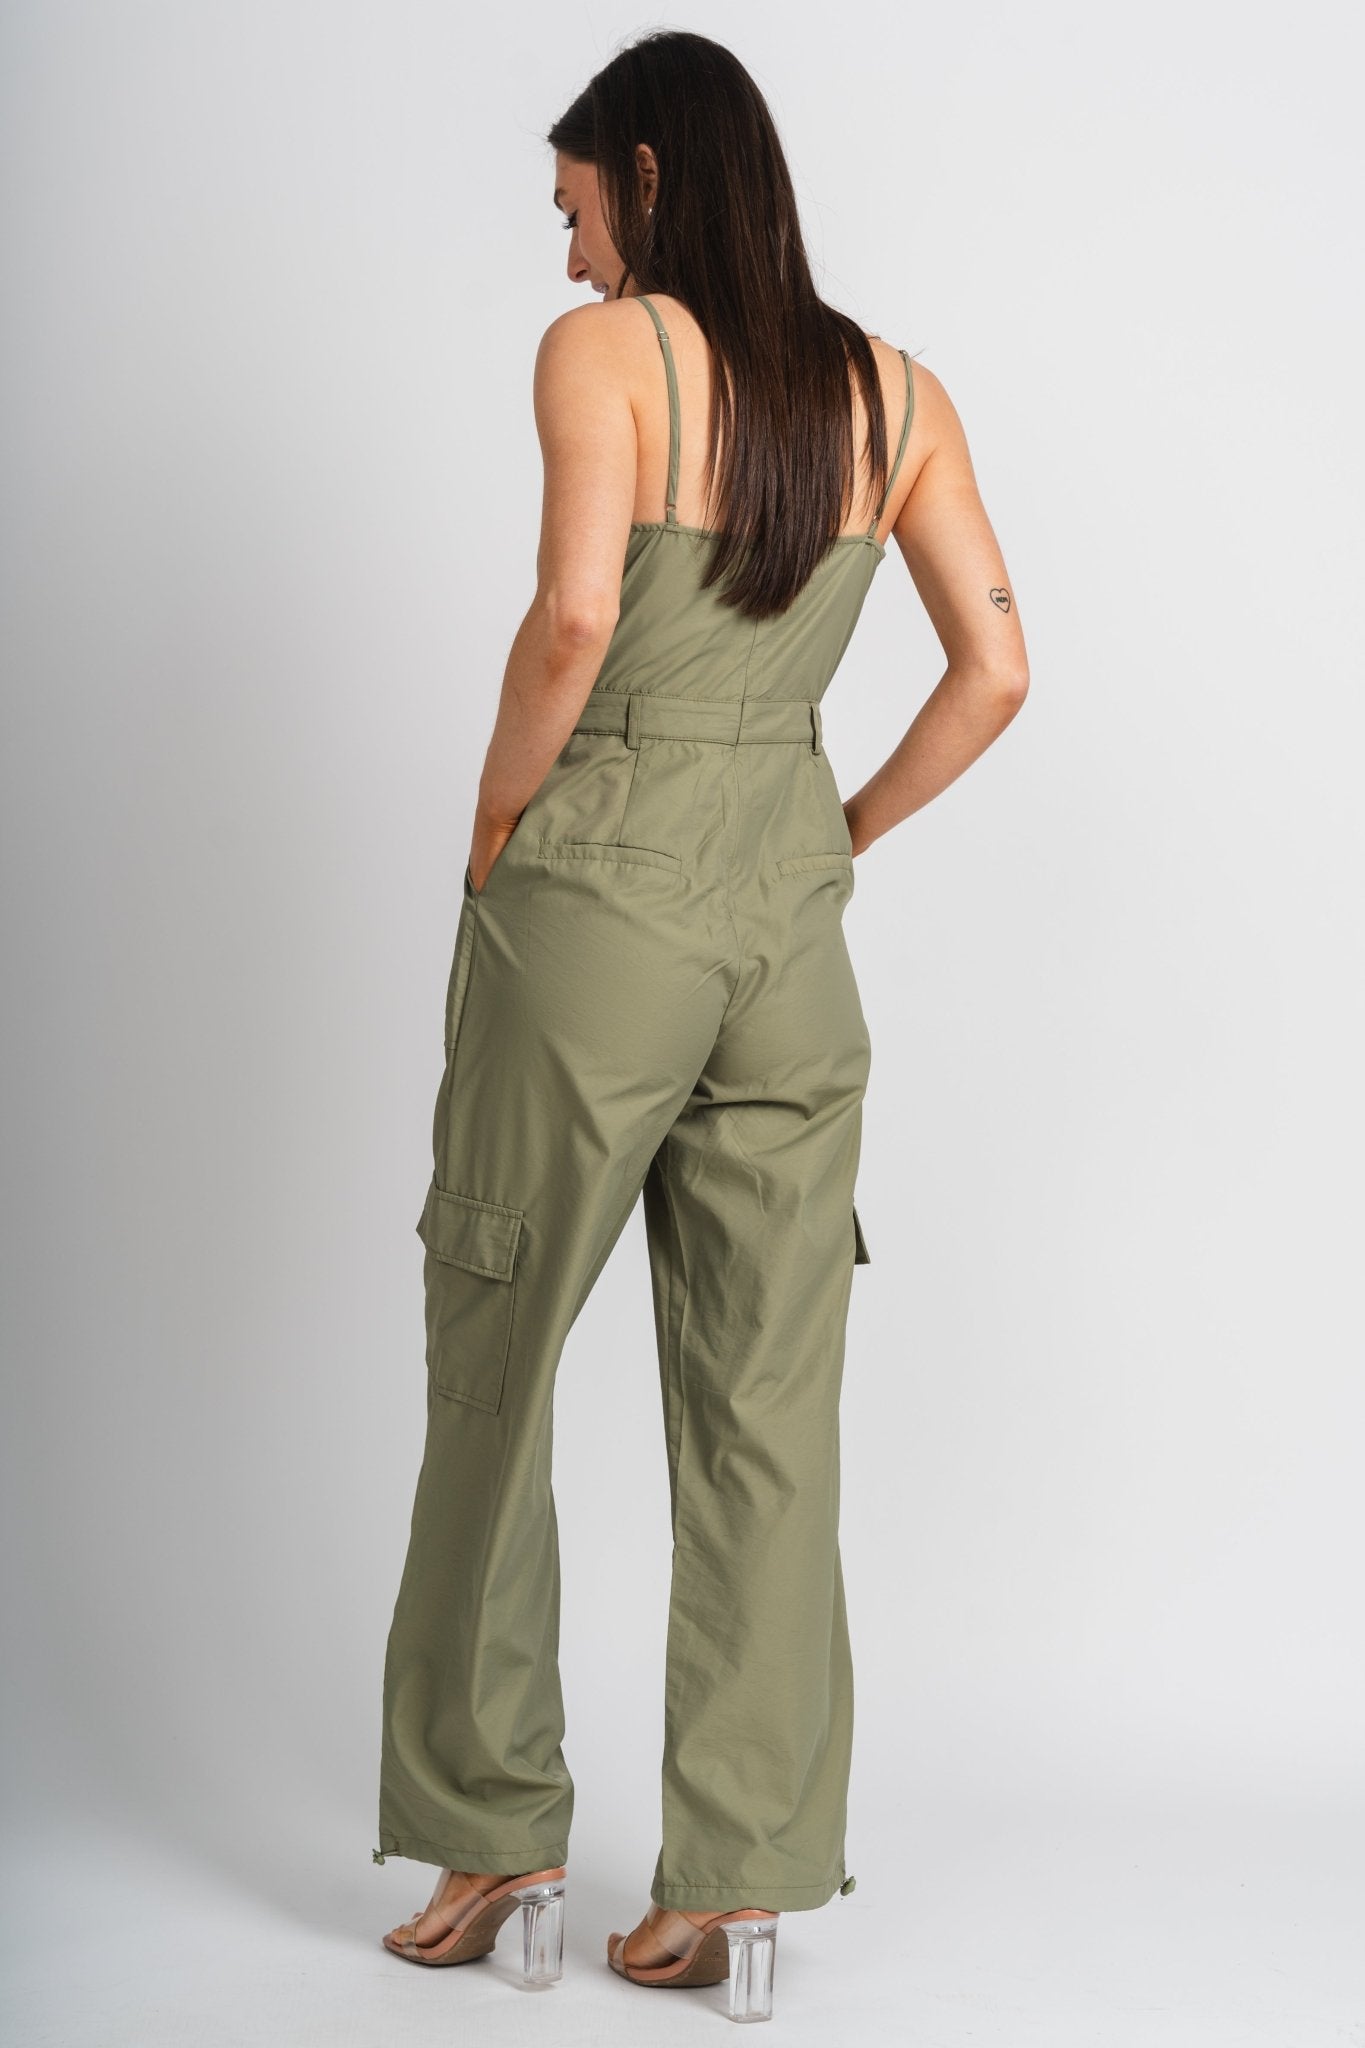 Cargo jumpsuit light olive - Affordable jumpsuit - Boutique Rompers & Pantsuits at Lush Fashion Lounge Boutique in Oklahoma City